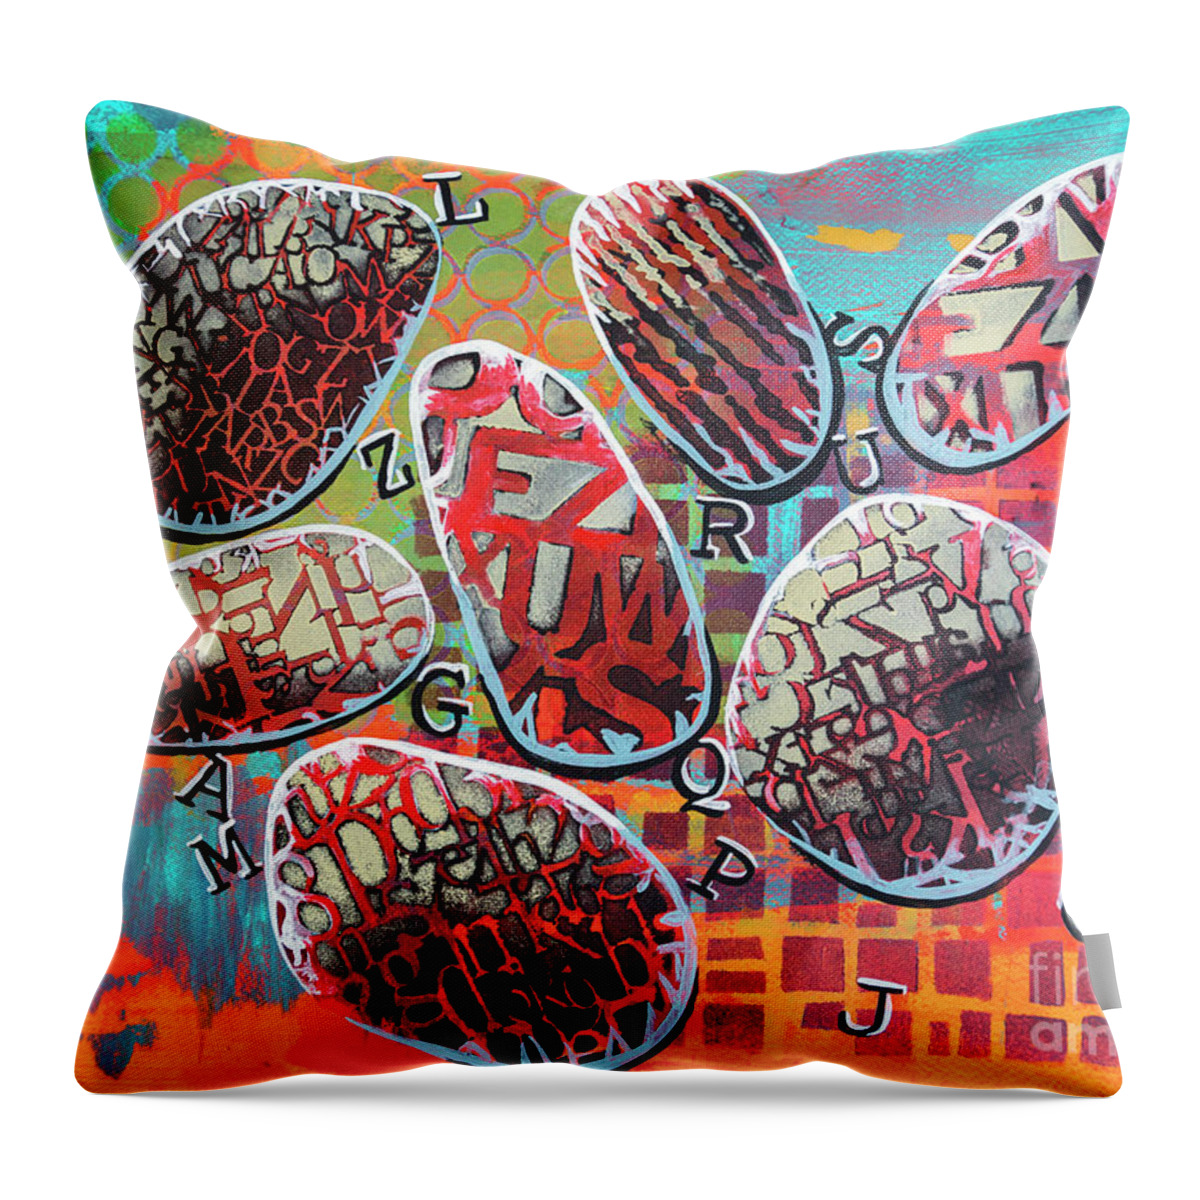 Nature Throw Pillow featuring the painting Balance3 by Ariadna De Raadt